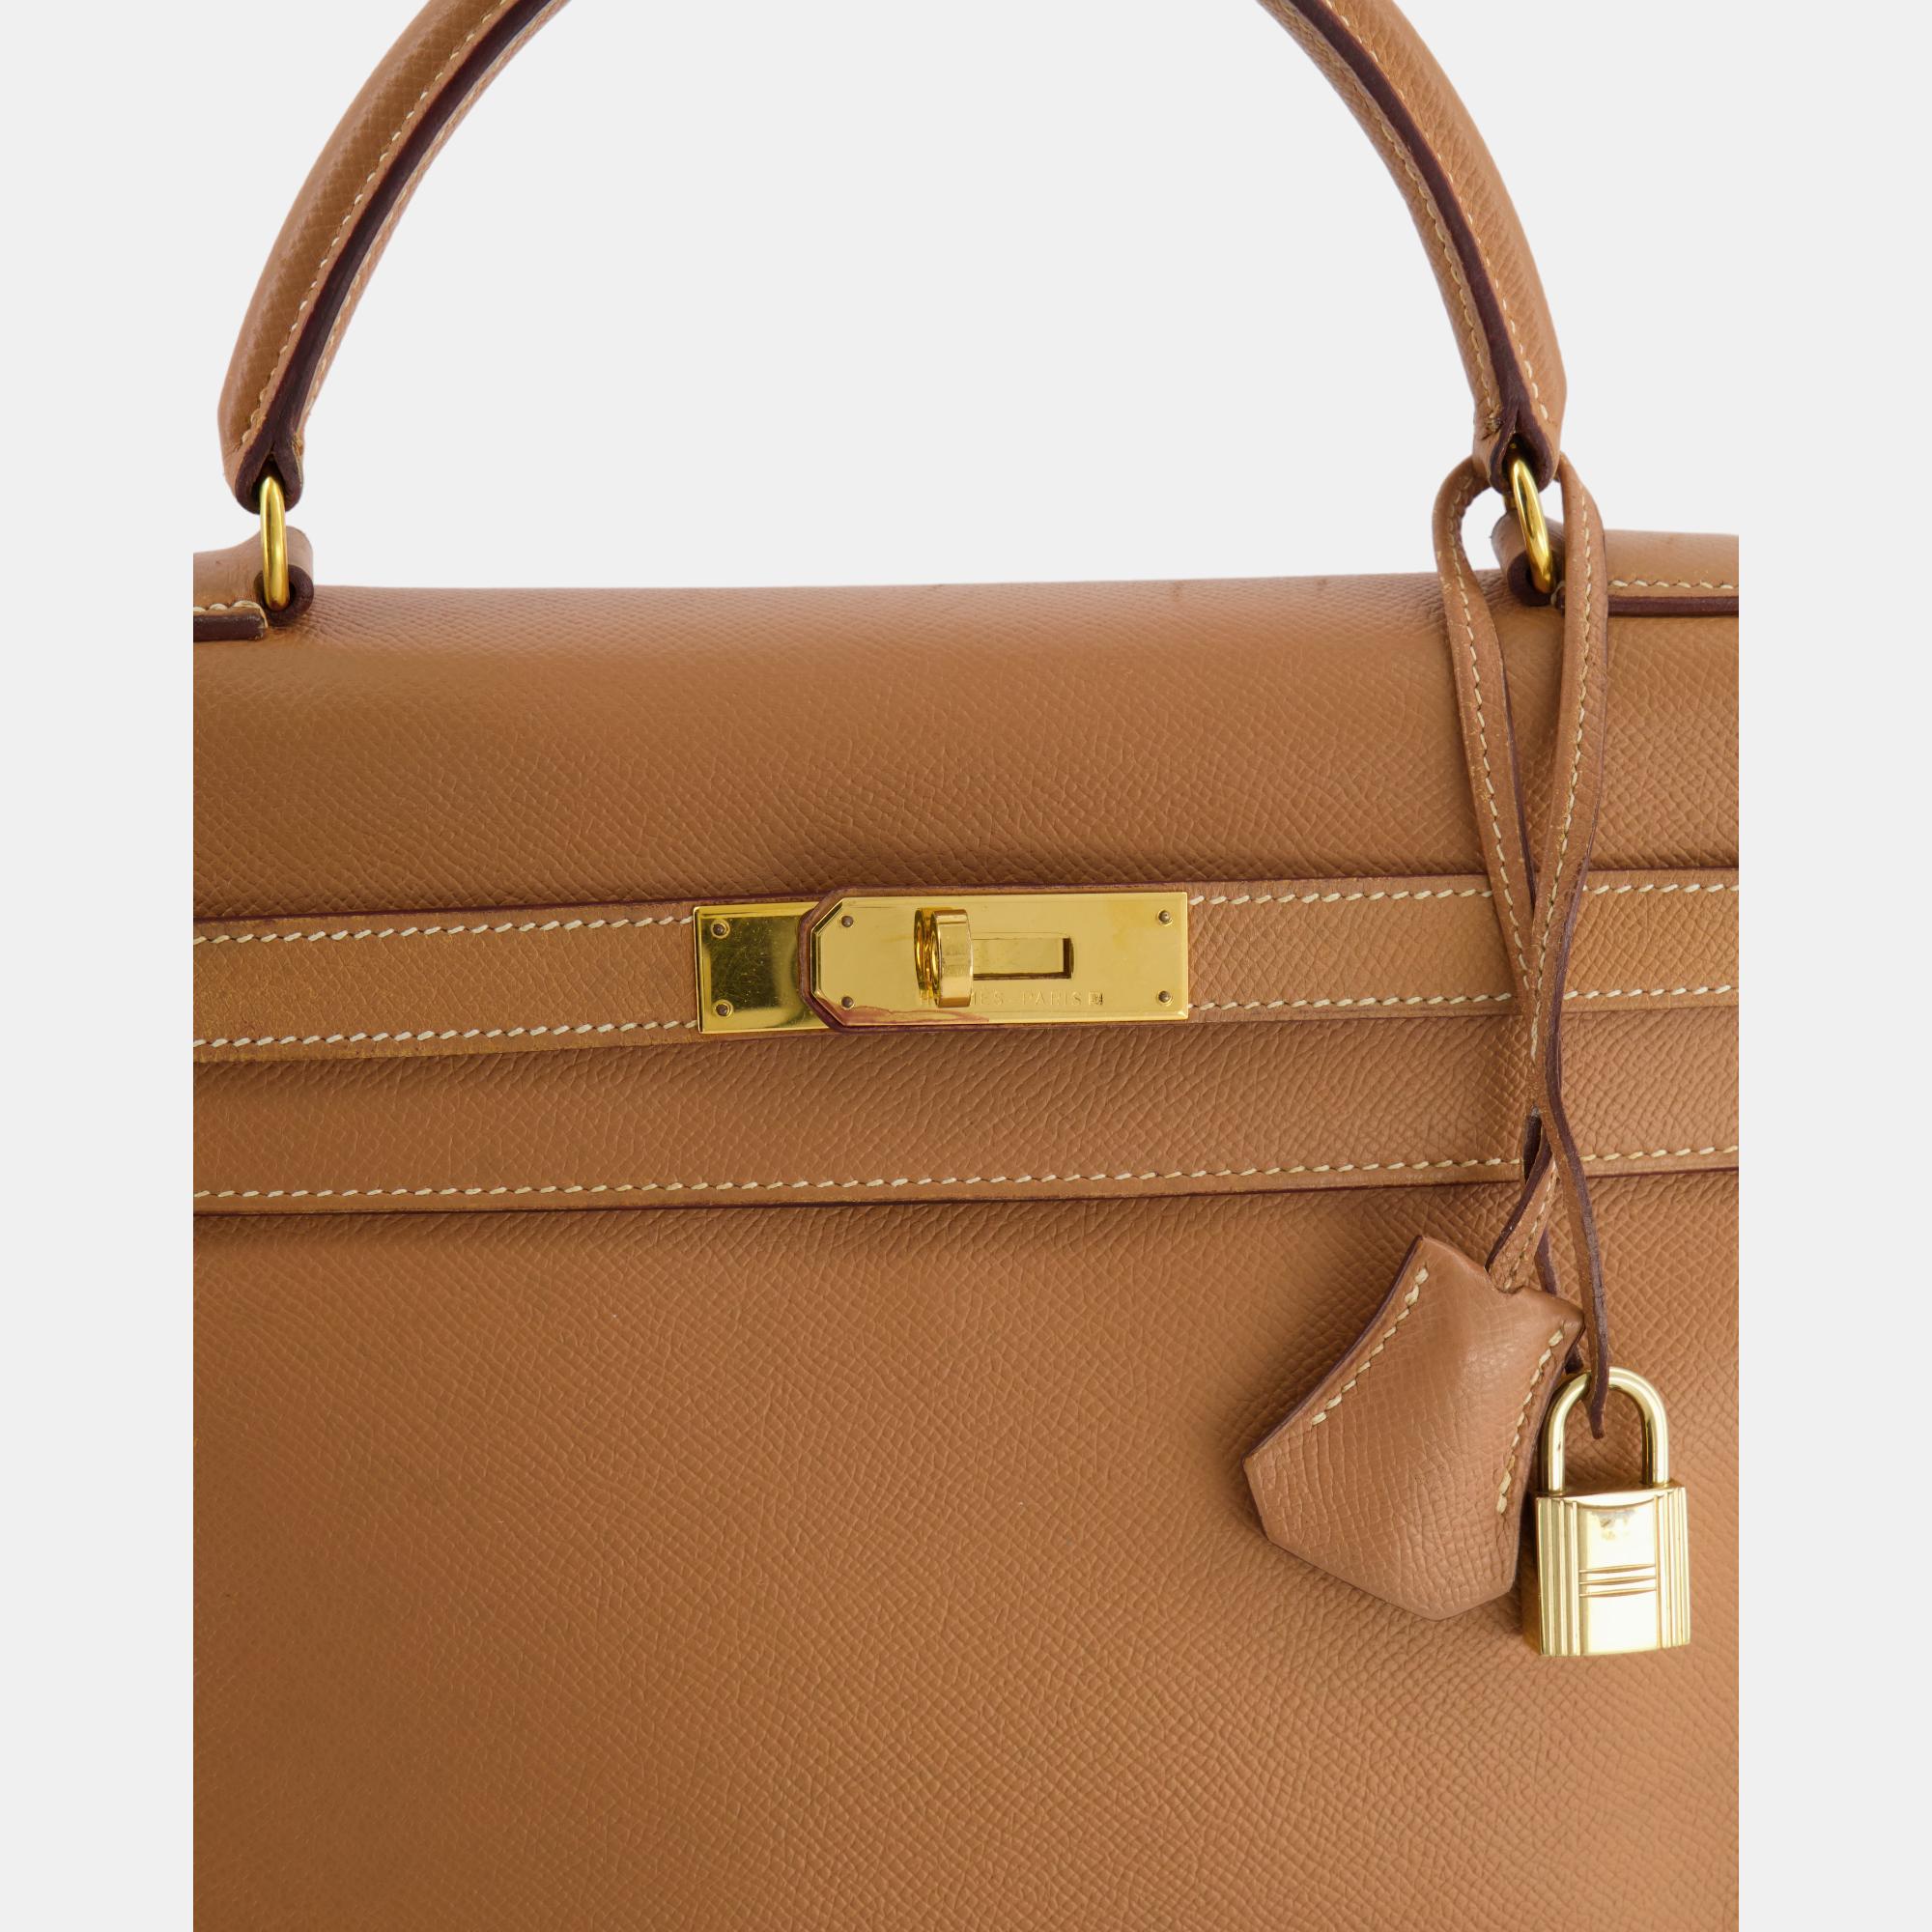 Hermes Vintage Kelly Bag 32cm In Gold Courchevel Leather With Gold Hardware